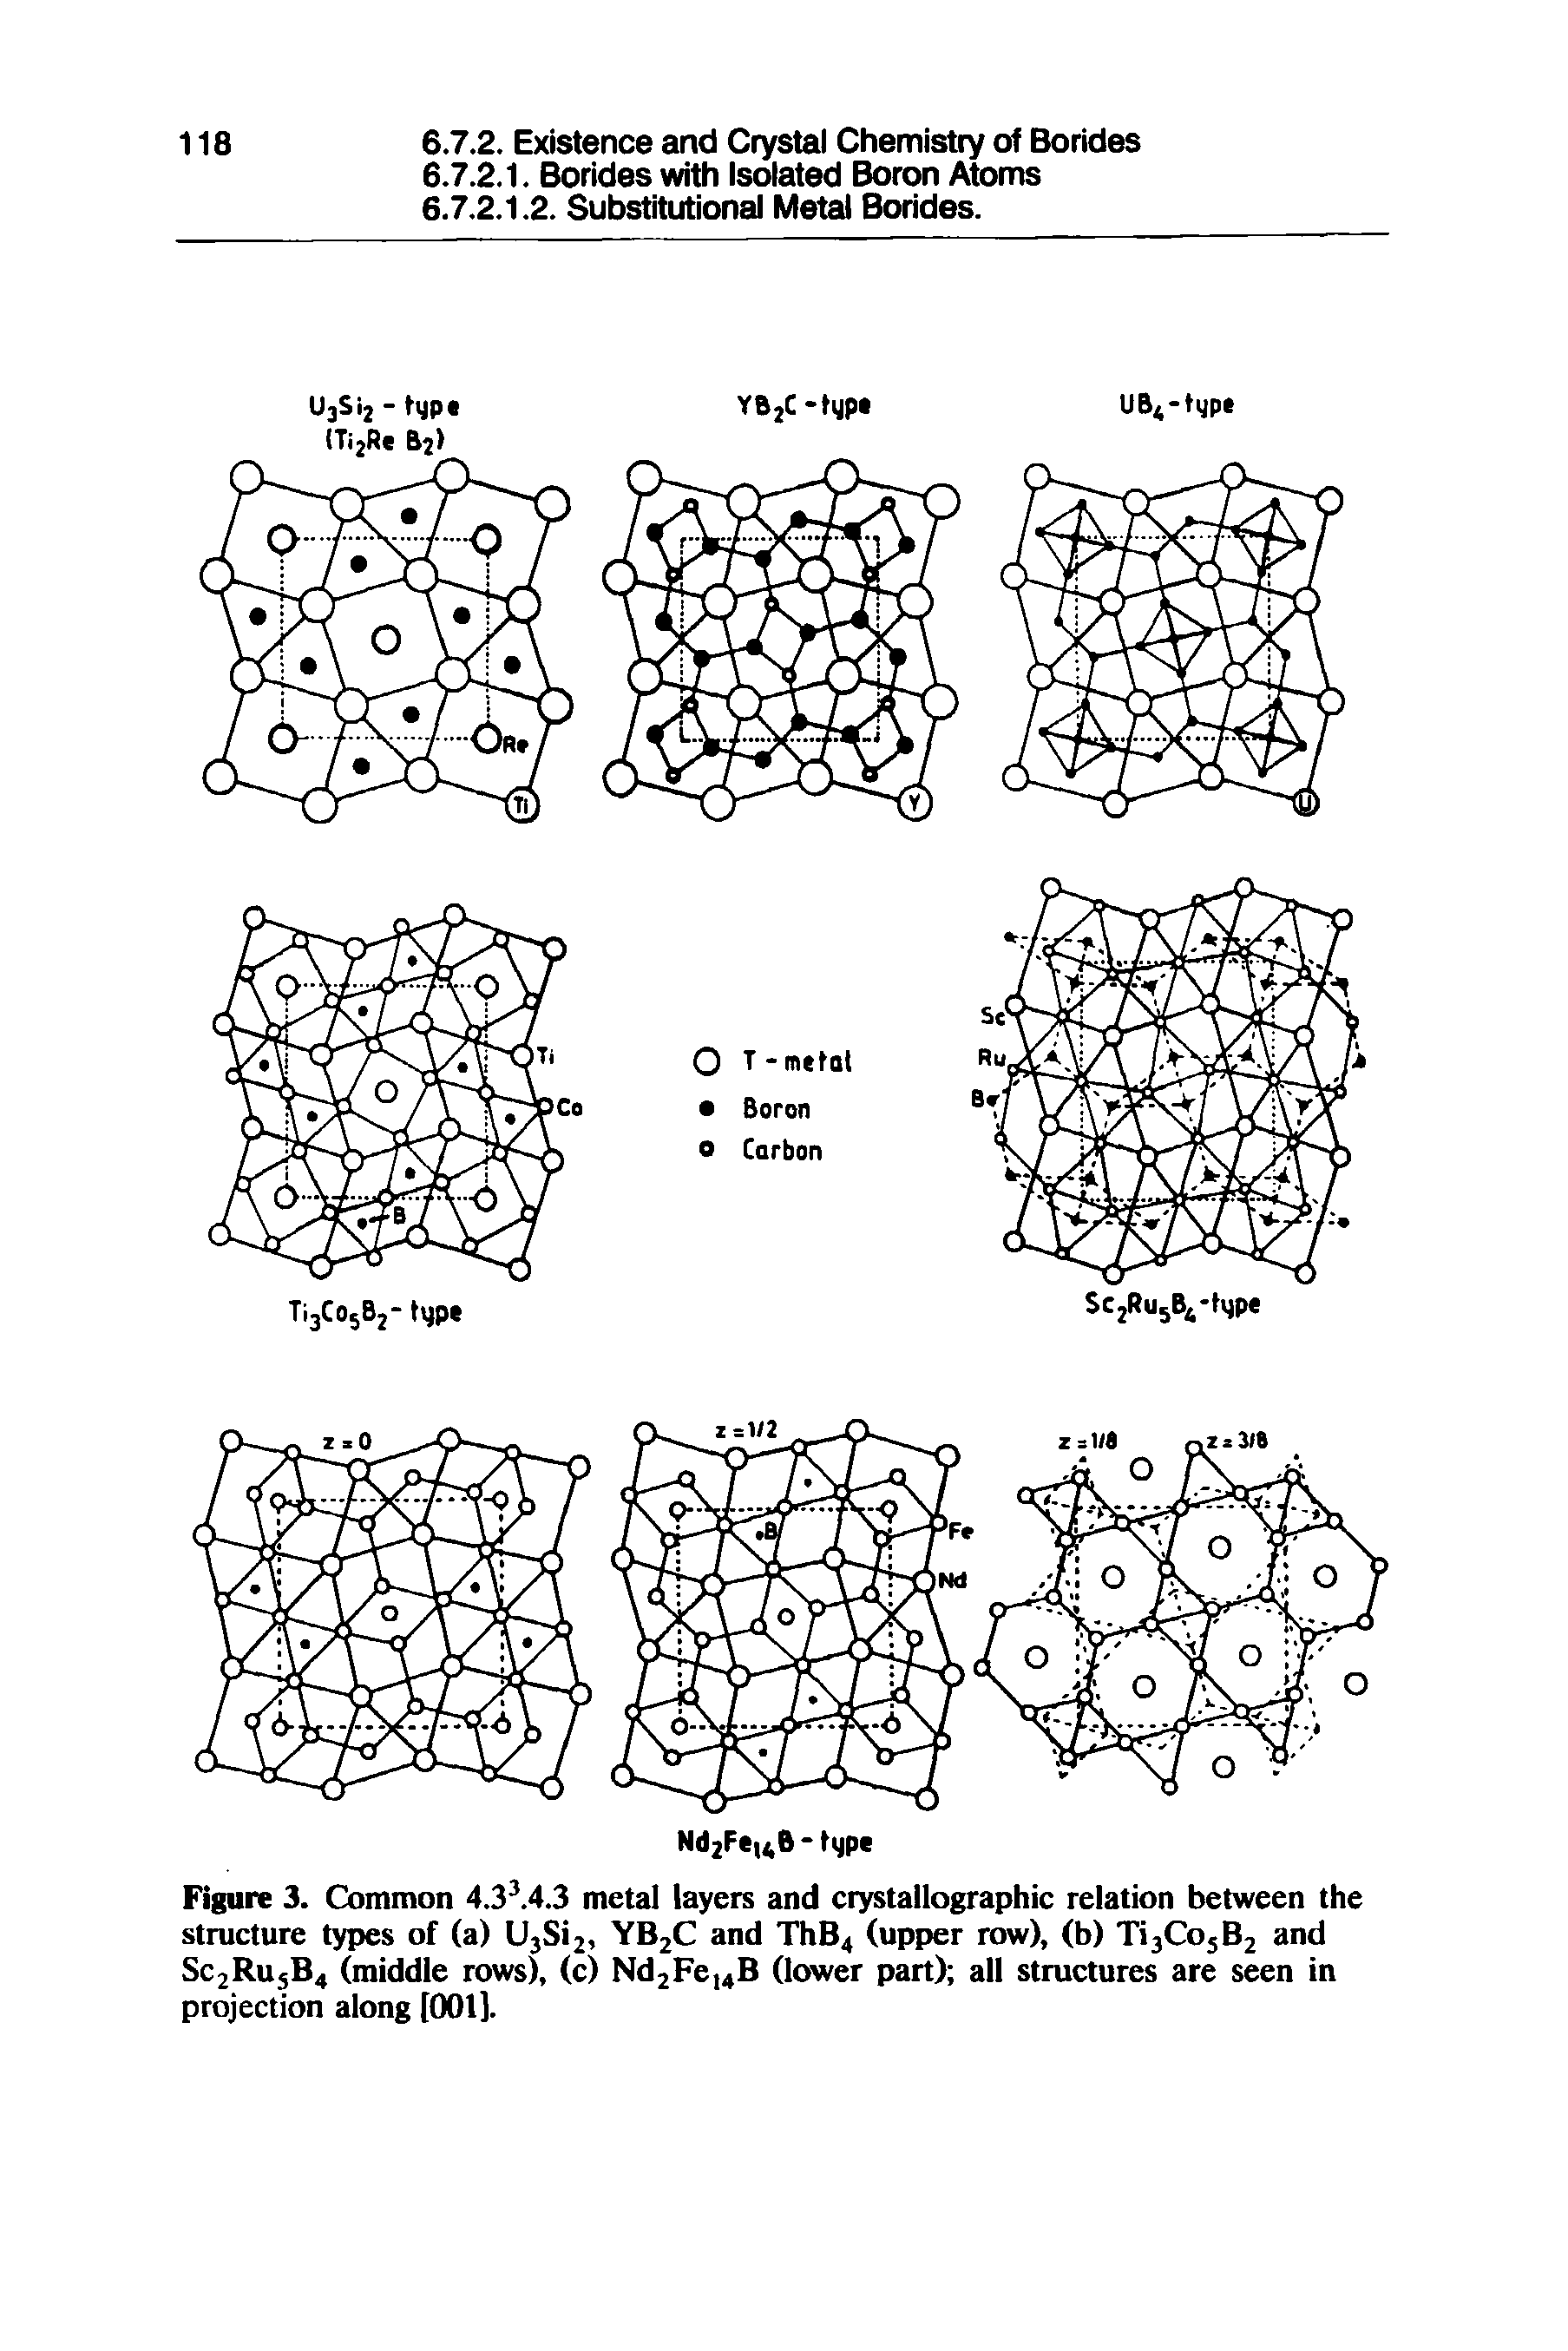 Figure 3. Common 4.3. 4.3 metal layers and crystallographic relation between the structure types of (a) U3Si2, YB2C and ThB4 (upper row), (b) Ti3Co5B2 and SC2RU5B4 (middle rows), (c) Nd2Fe,4B (lower part) all structures are seen in projection along [001].